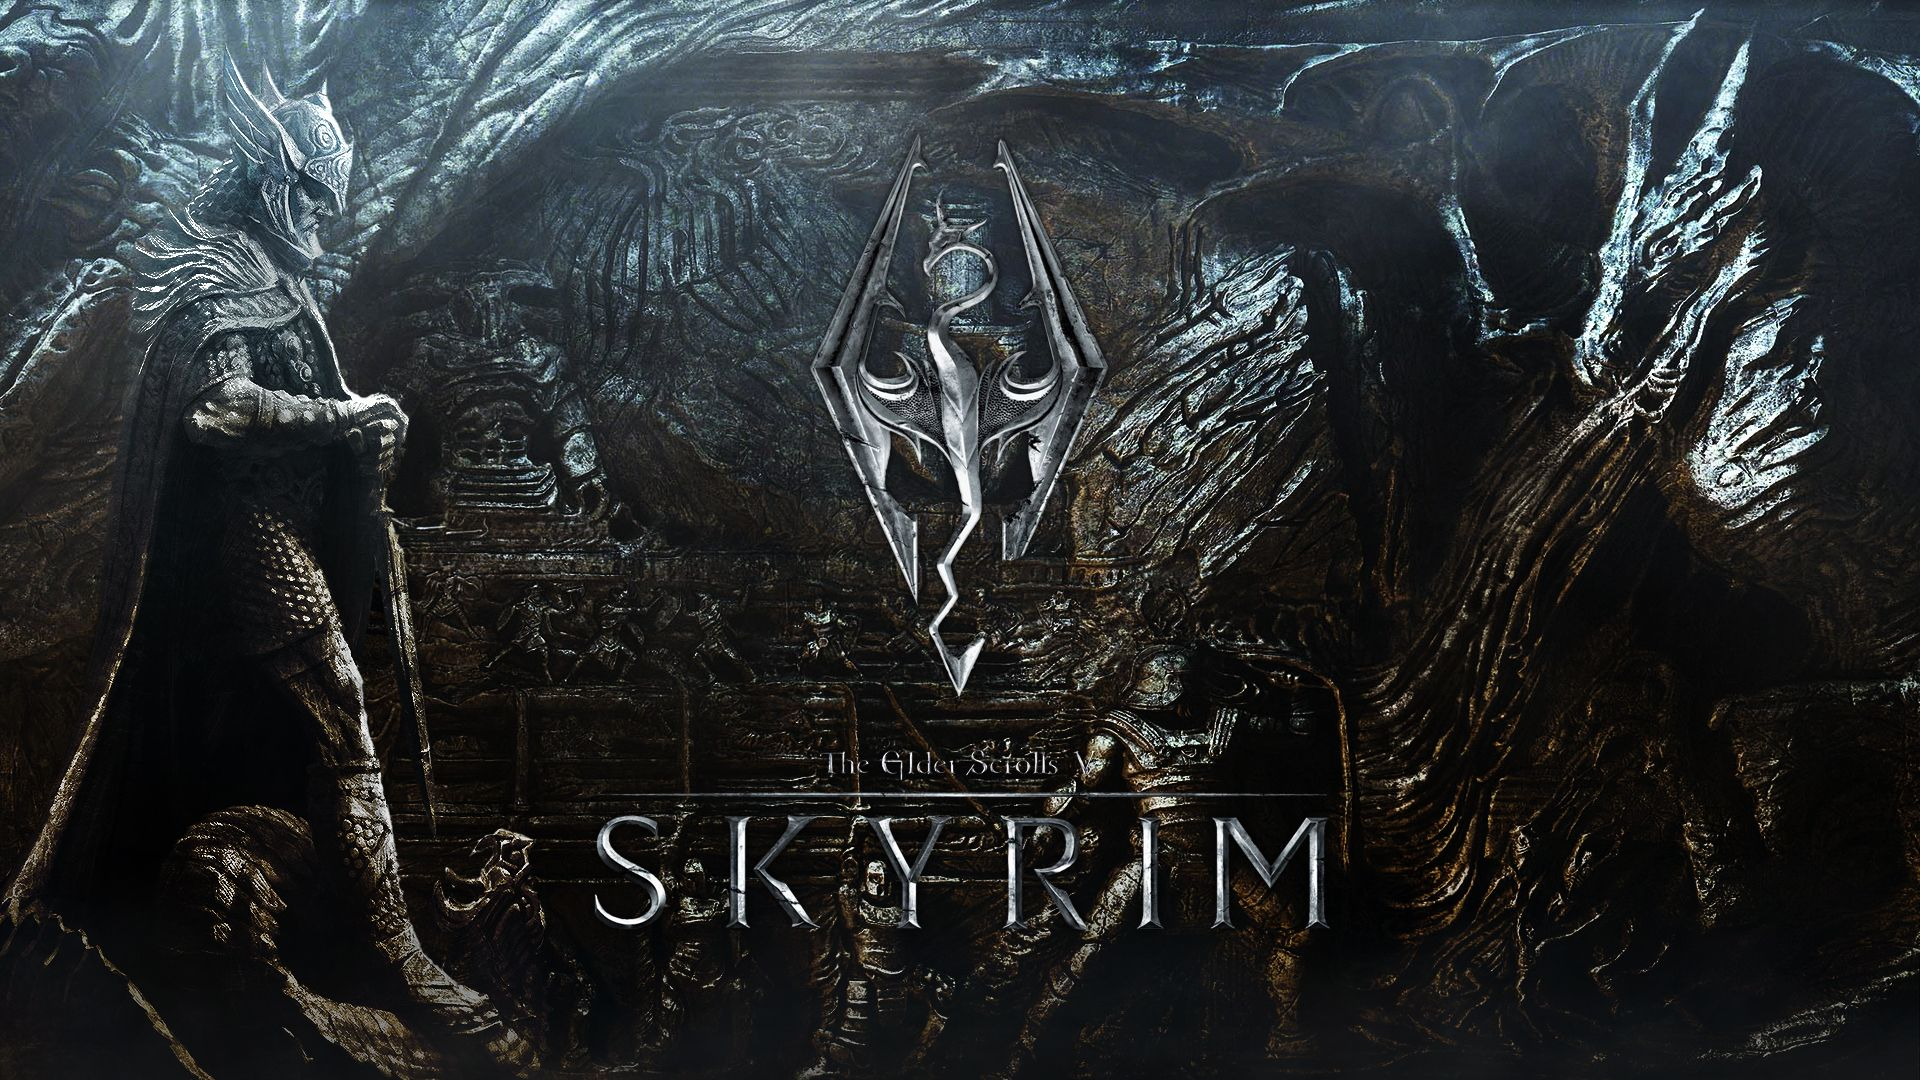 1920x1080 Skyrim HD Wallpapers | Wallpapers, Backgrounds, Images, Art Photos. | Skyrim wallpaper, Skyrim, Skyrim art